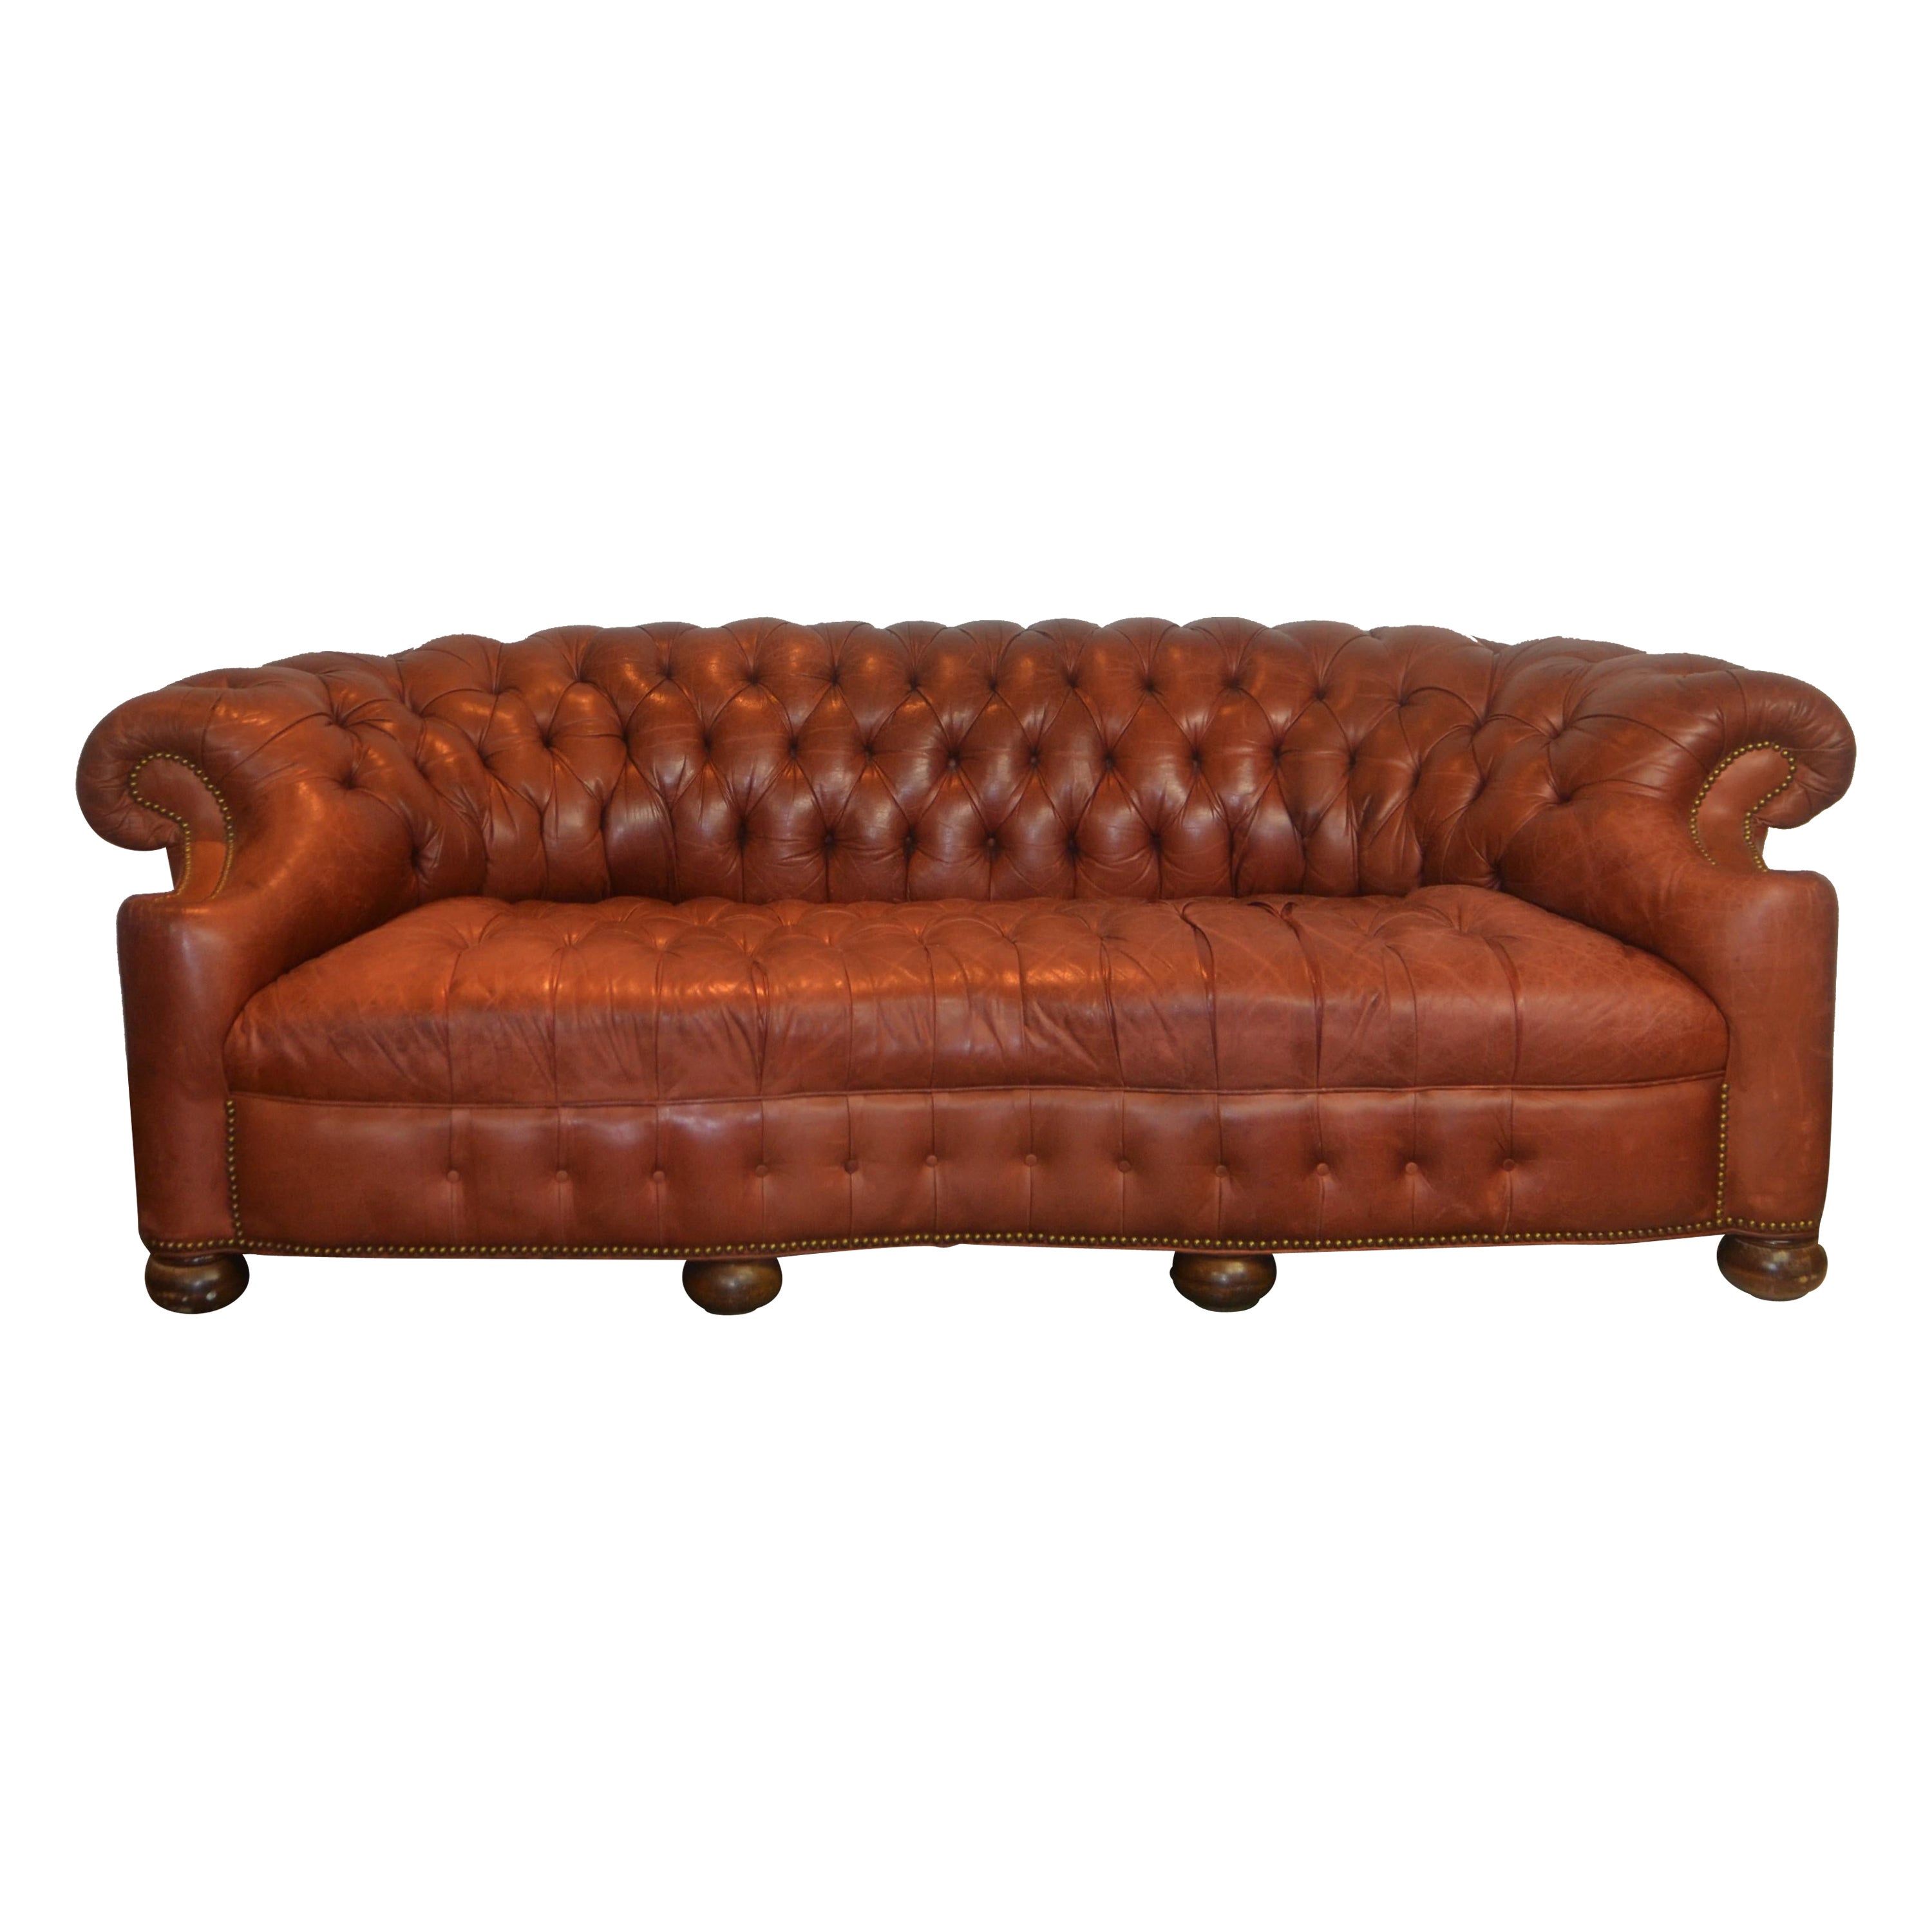 Chesterfield Style Cigar Leather Sofa For Sale at 1stDibs